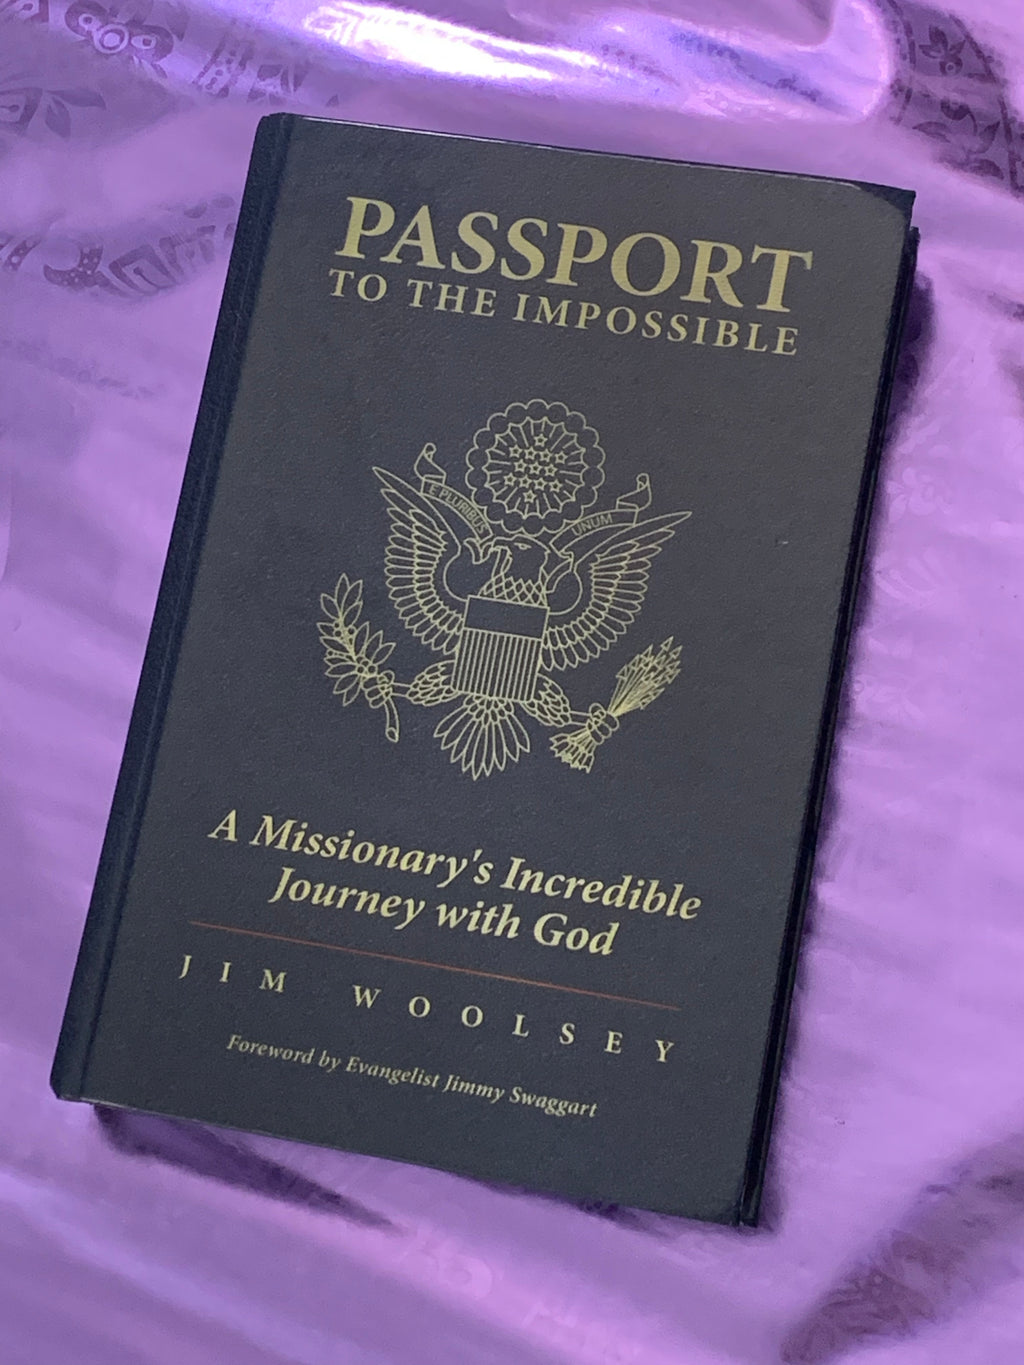 Passport to the Impossible: A Missionary's Incredible Journey with God- By Jim Woolsey